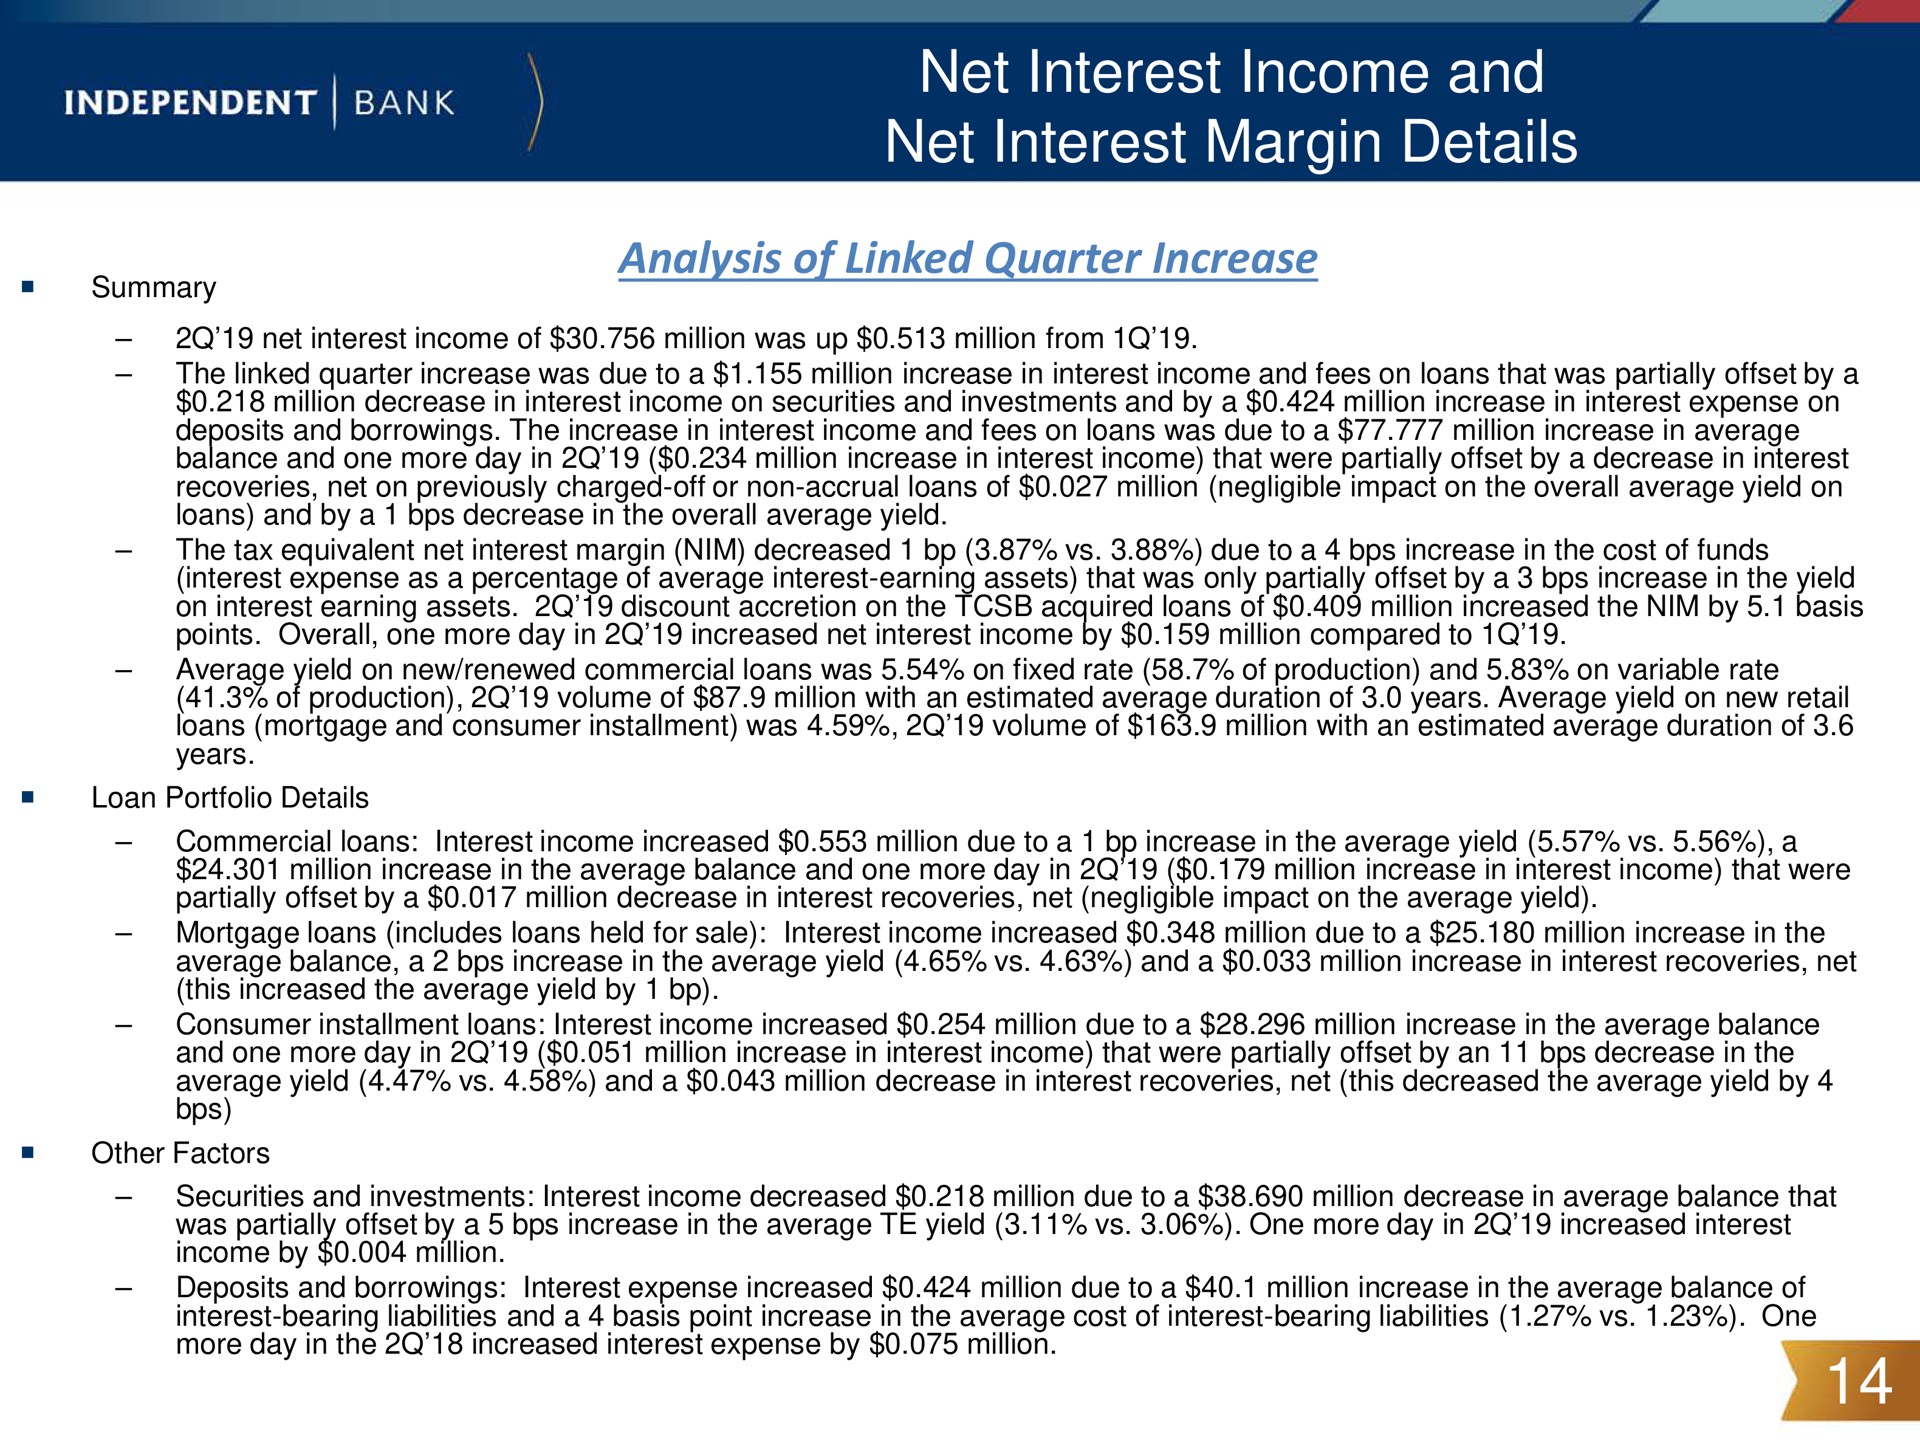 net interest income and net interest margin details | Independent Bank Corp